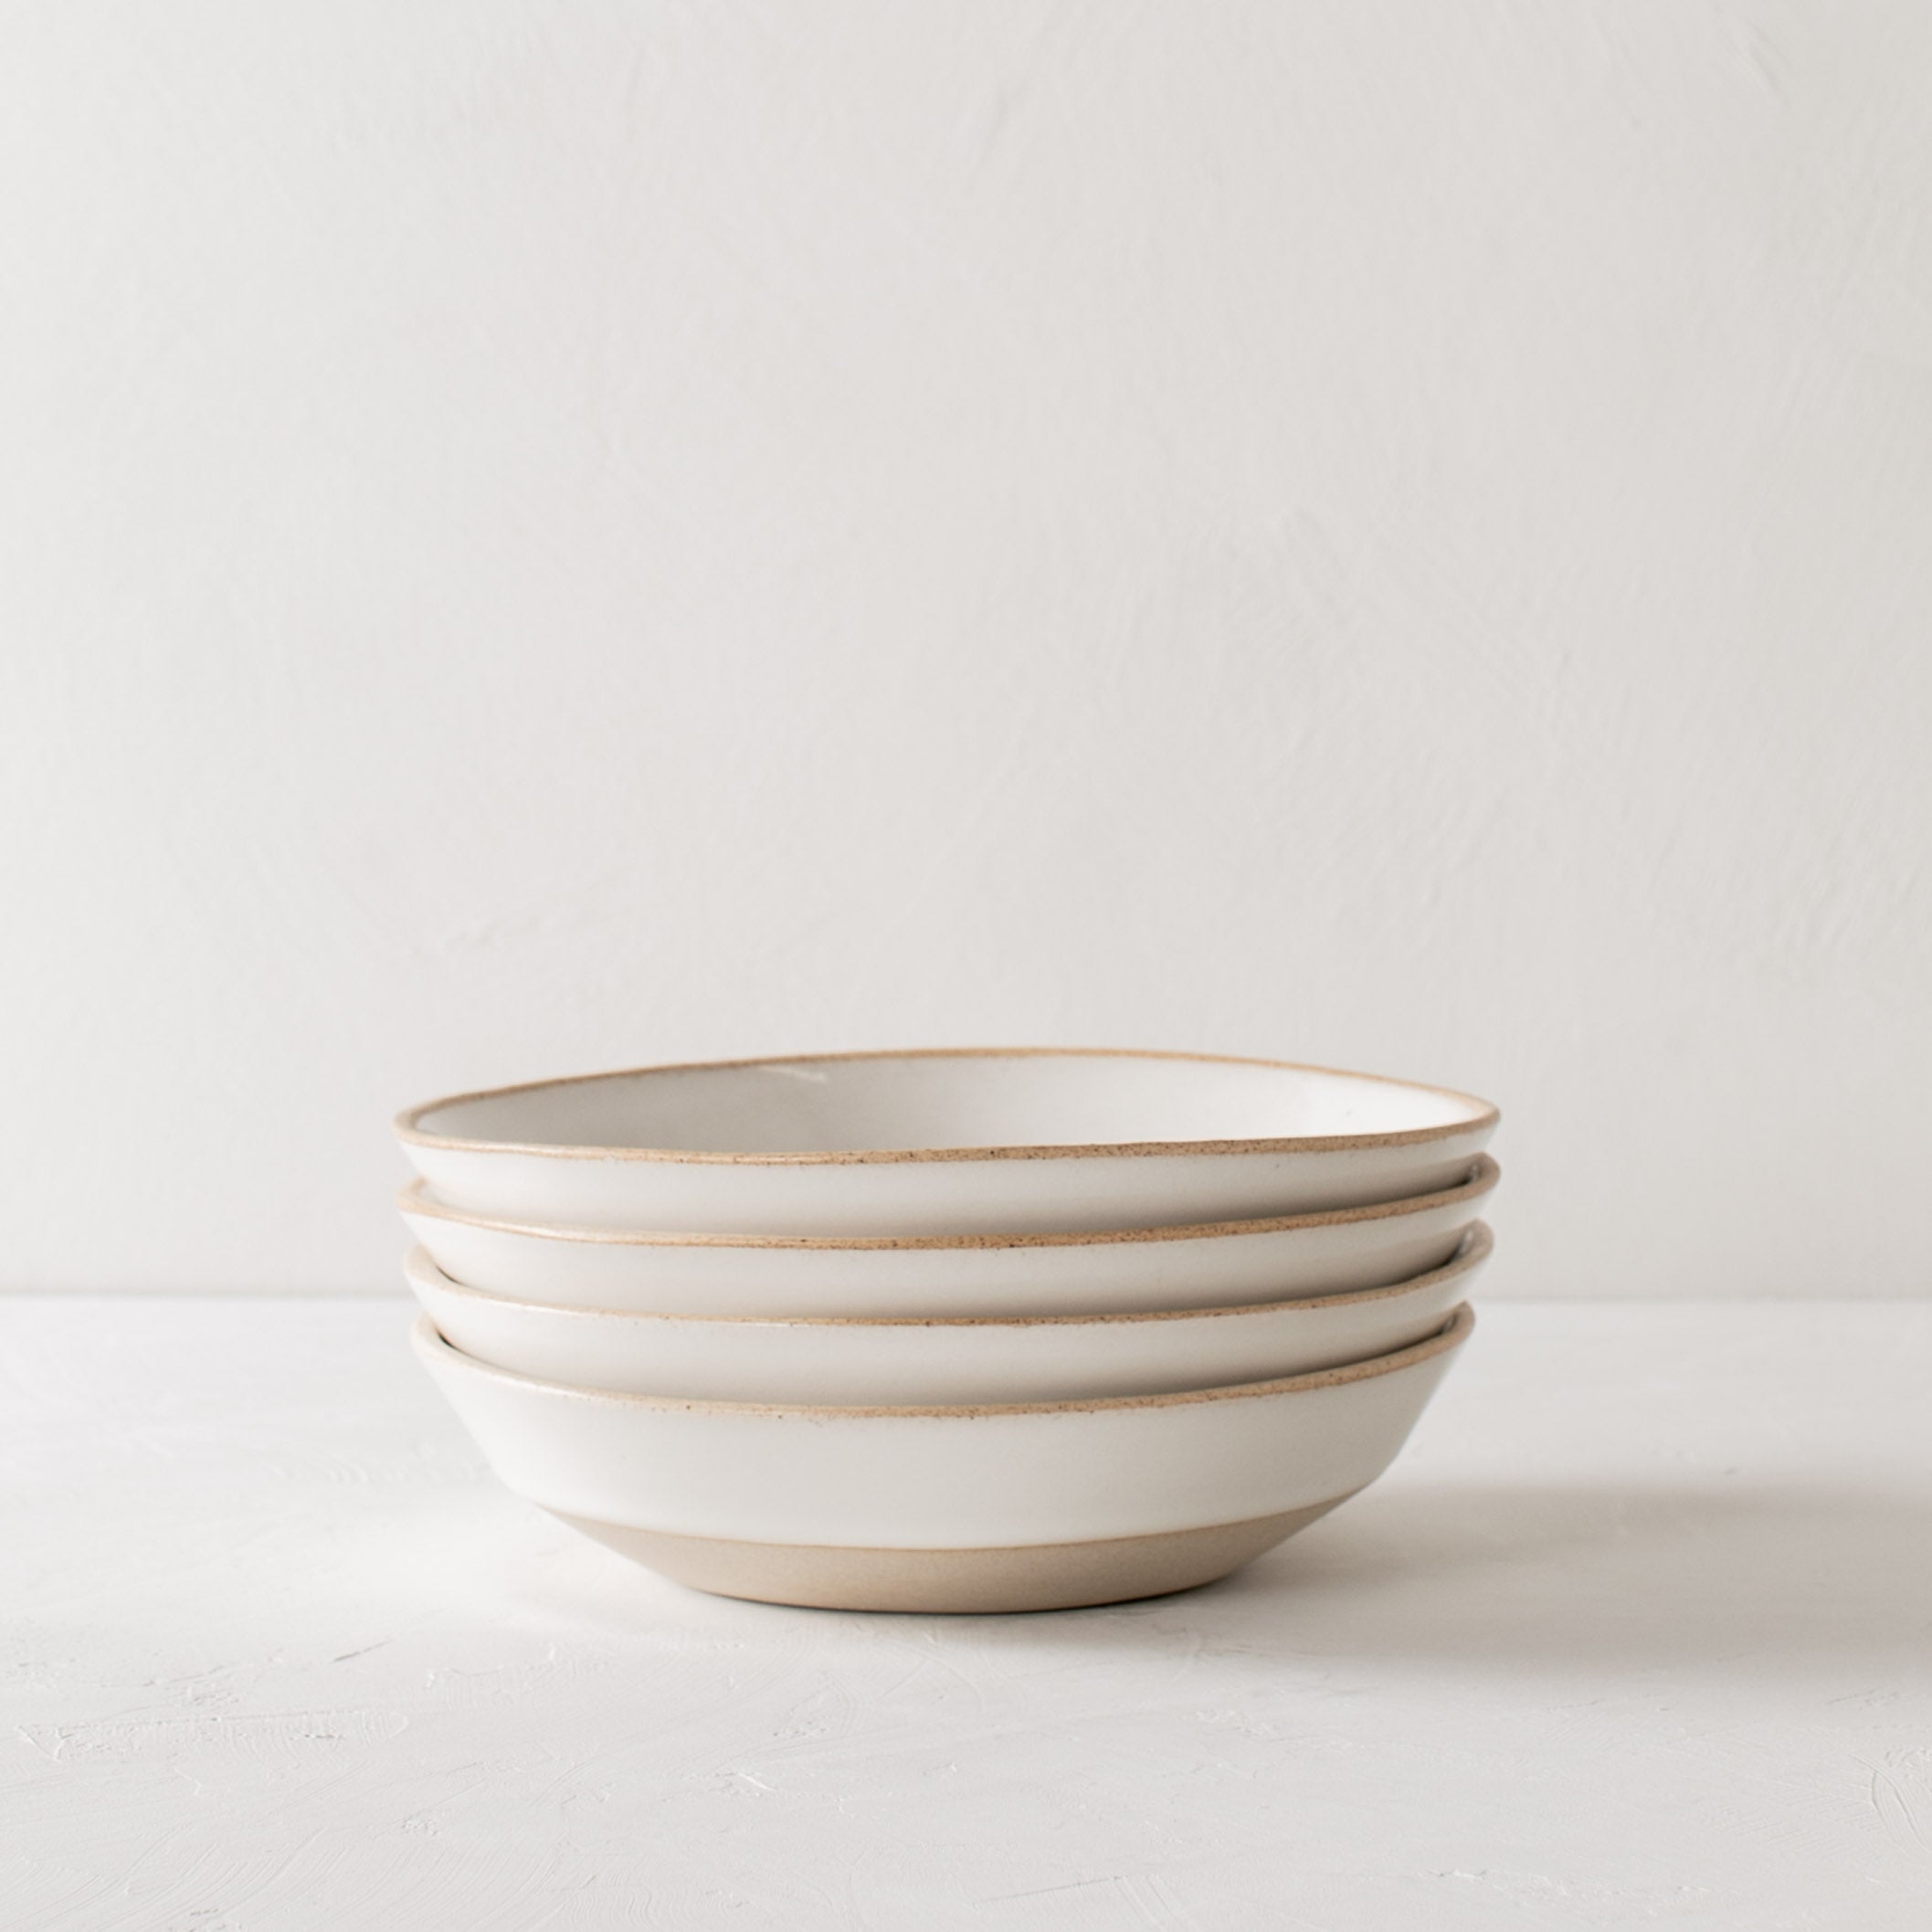 Stack of four minimal white ceramic minimal pasta bowls. Bowls have an exposed stoneware rime and base. Handmade pasta bowl designed and sold by Convivial Production, Kansas City ceramics.